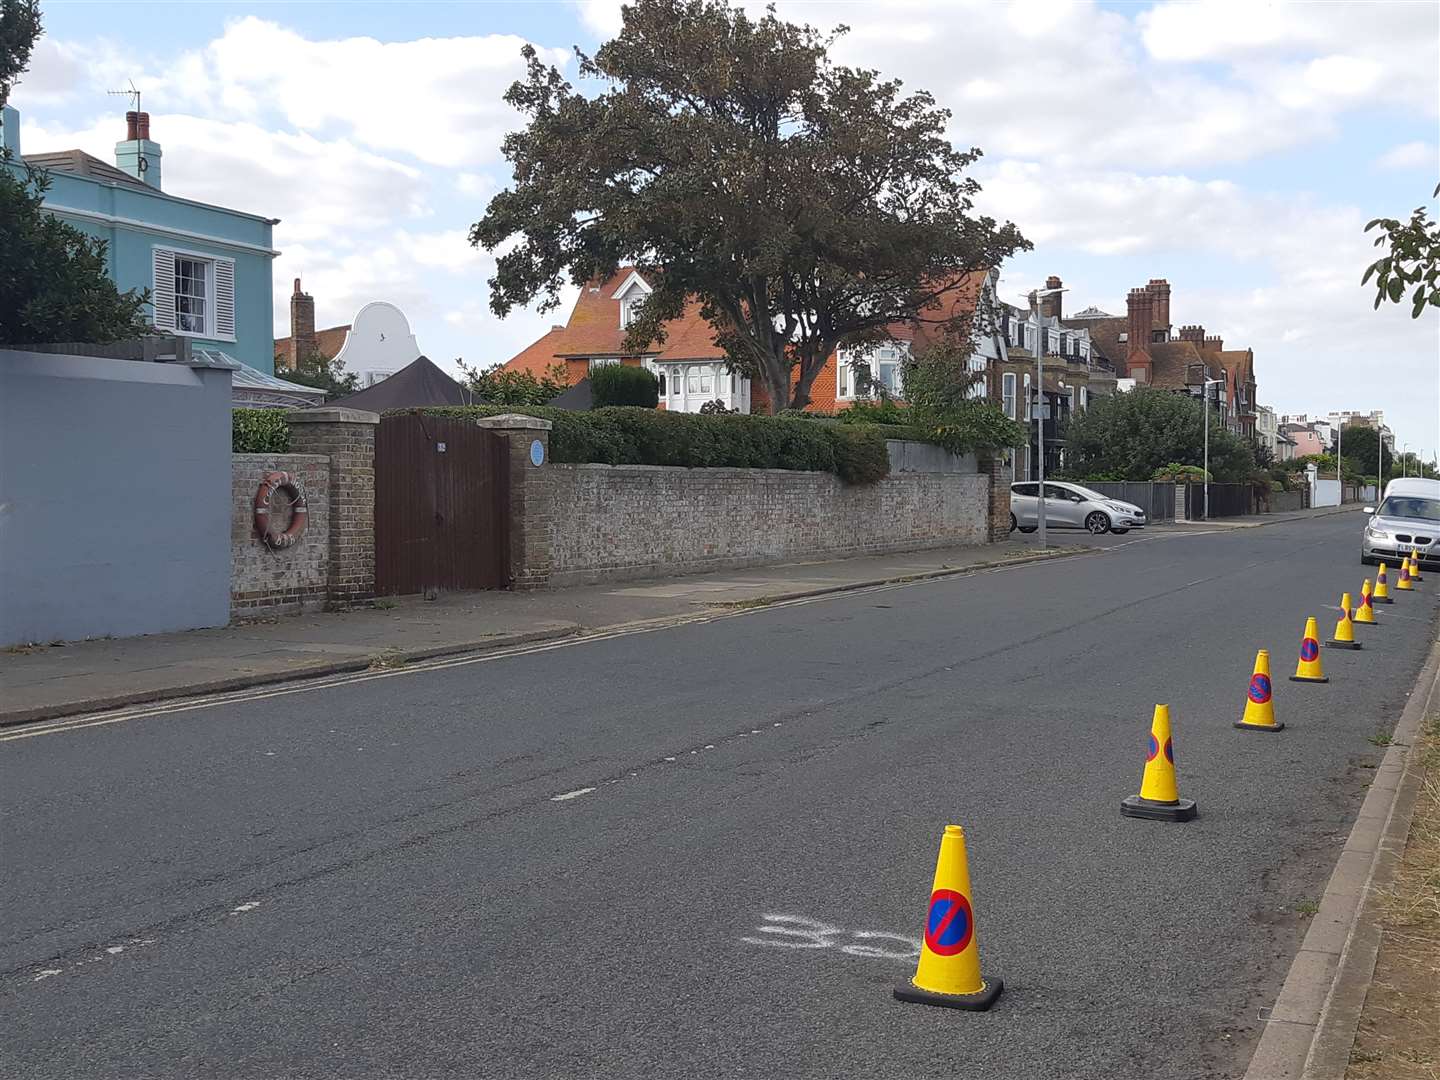 Yellow cones restrict parking outside the house believed to have been hired by film producers